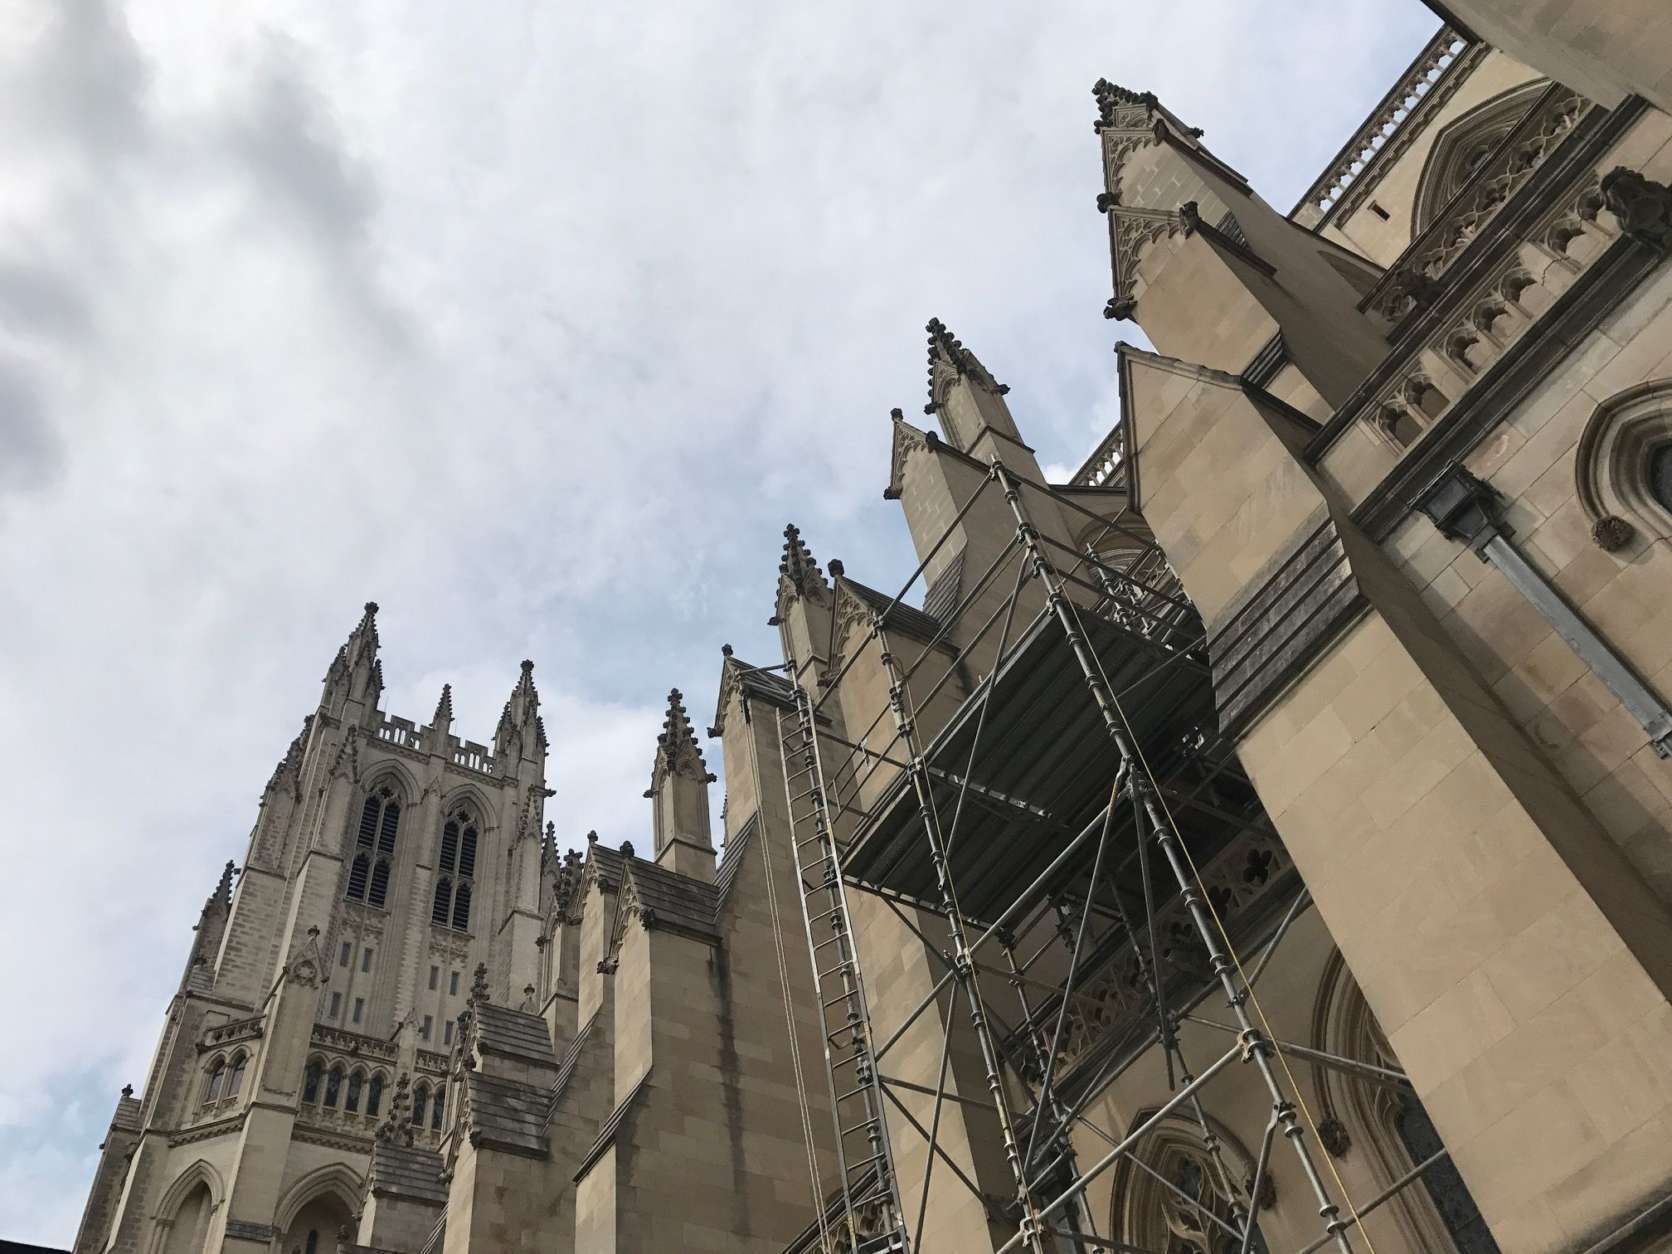 The prophets and stone surrounding them damaged in the earthquake were removed from the south transept of the National Cathedral. (WTOP/Megan Cloherty)